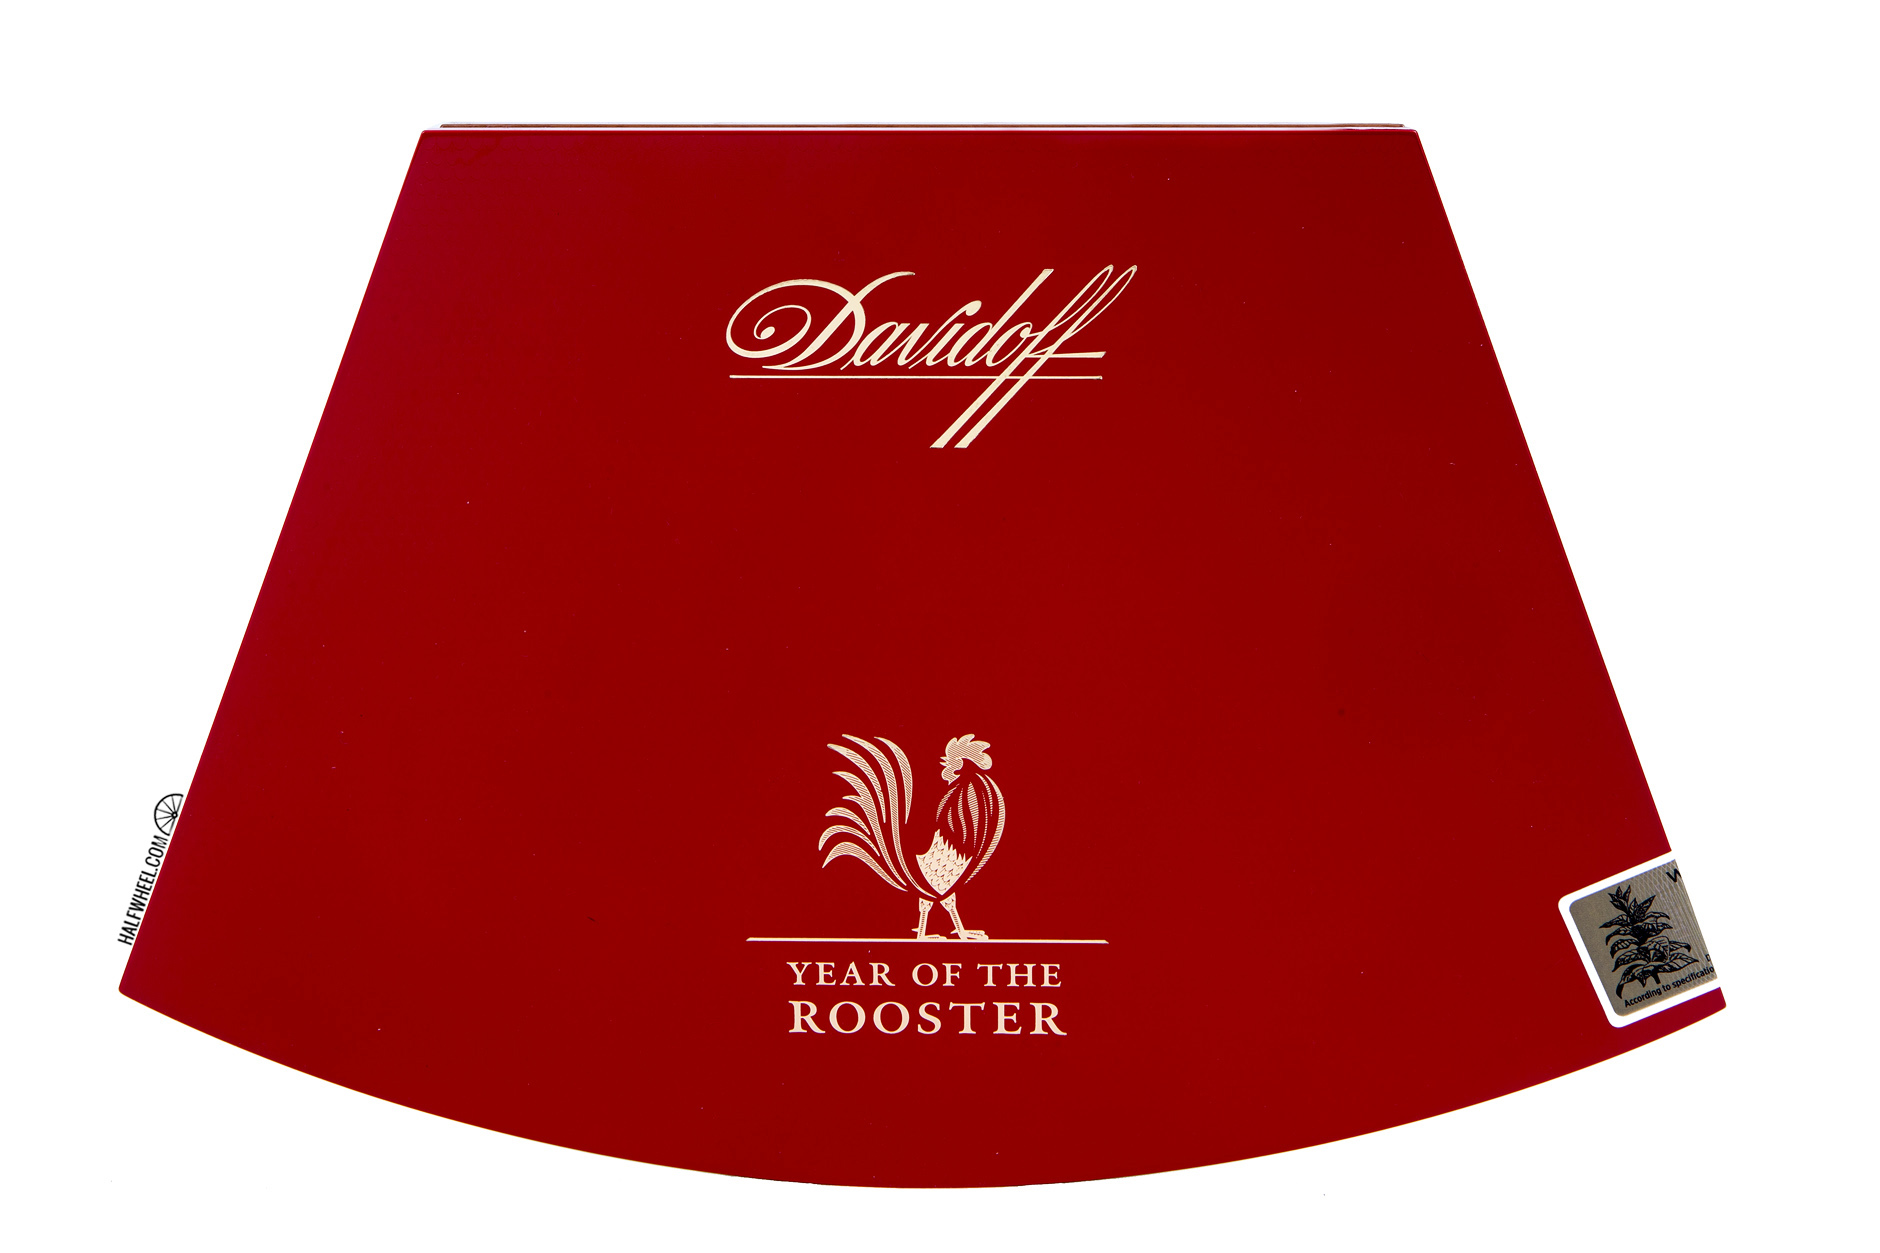 davidoff-limited-edition-2017-year-of-the-rooster-box-1